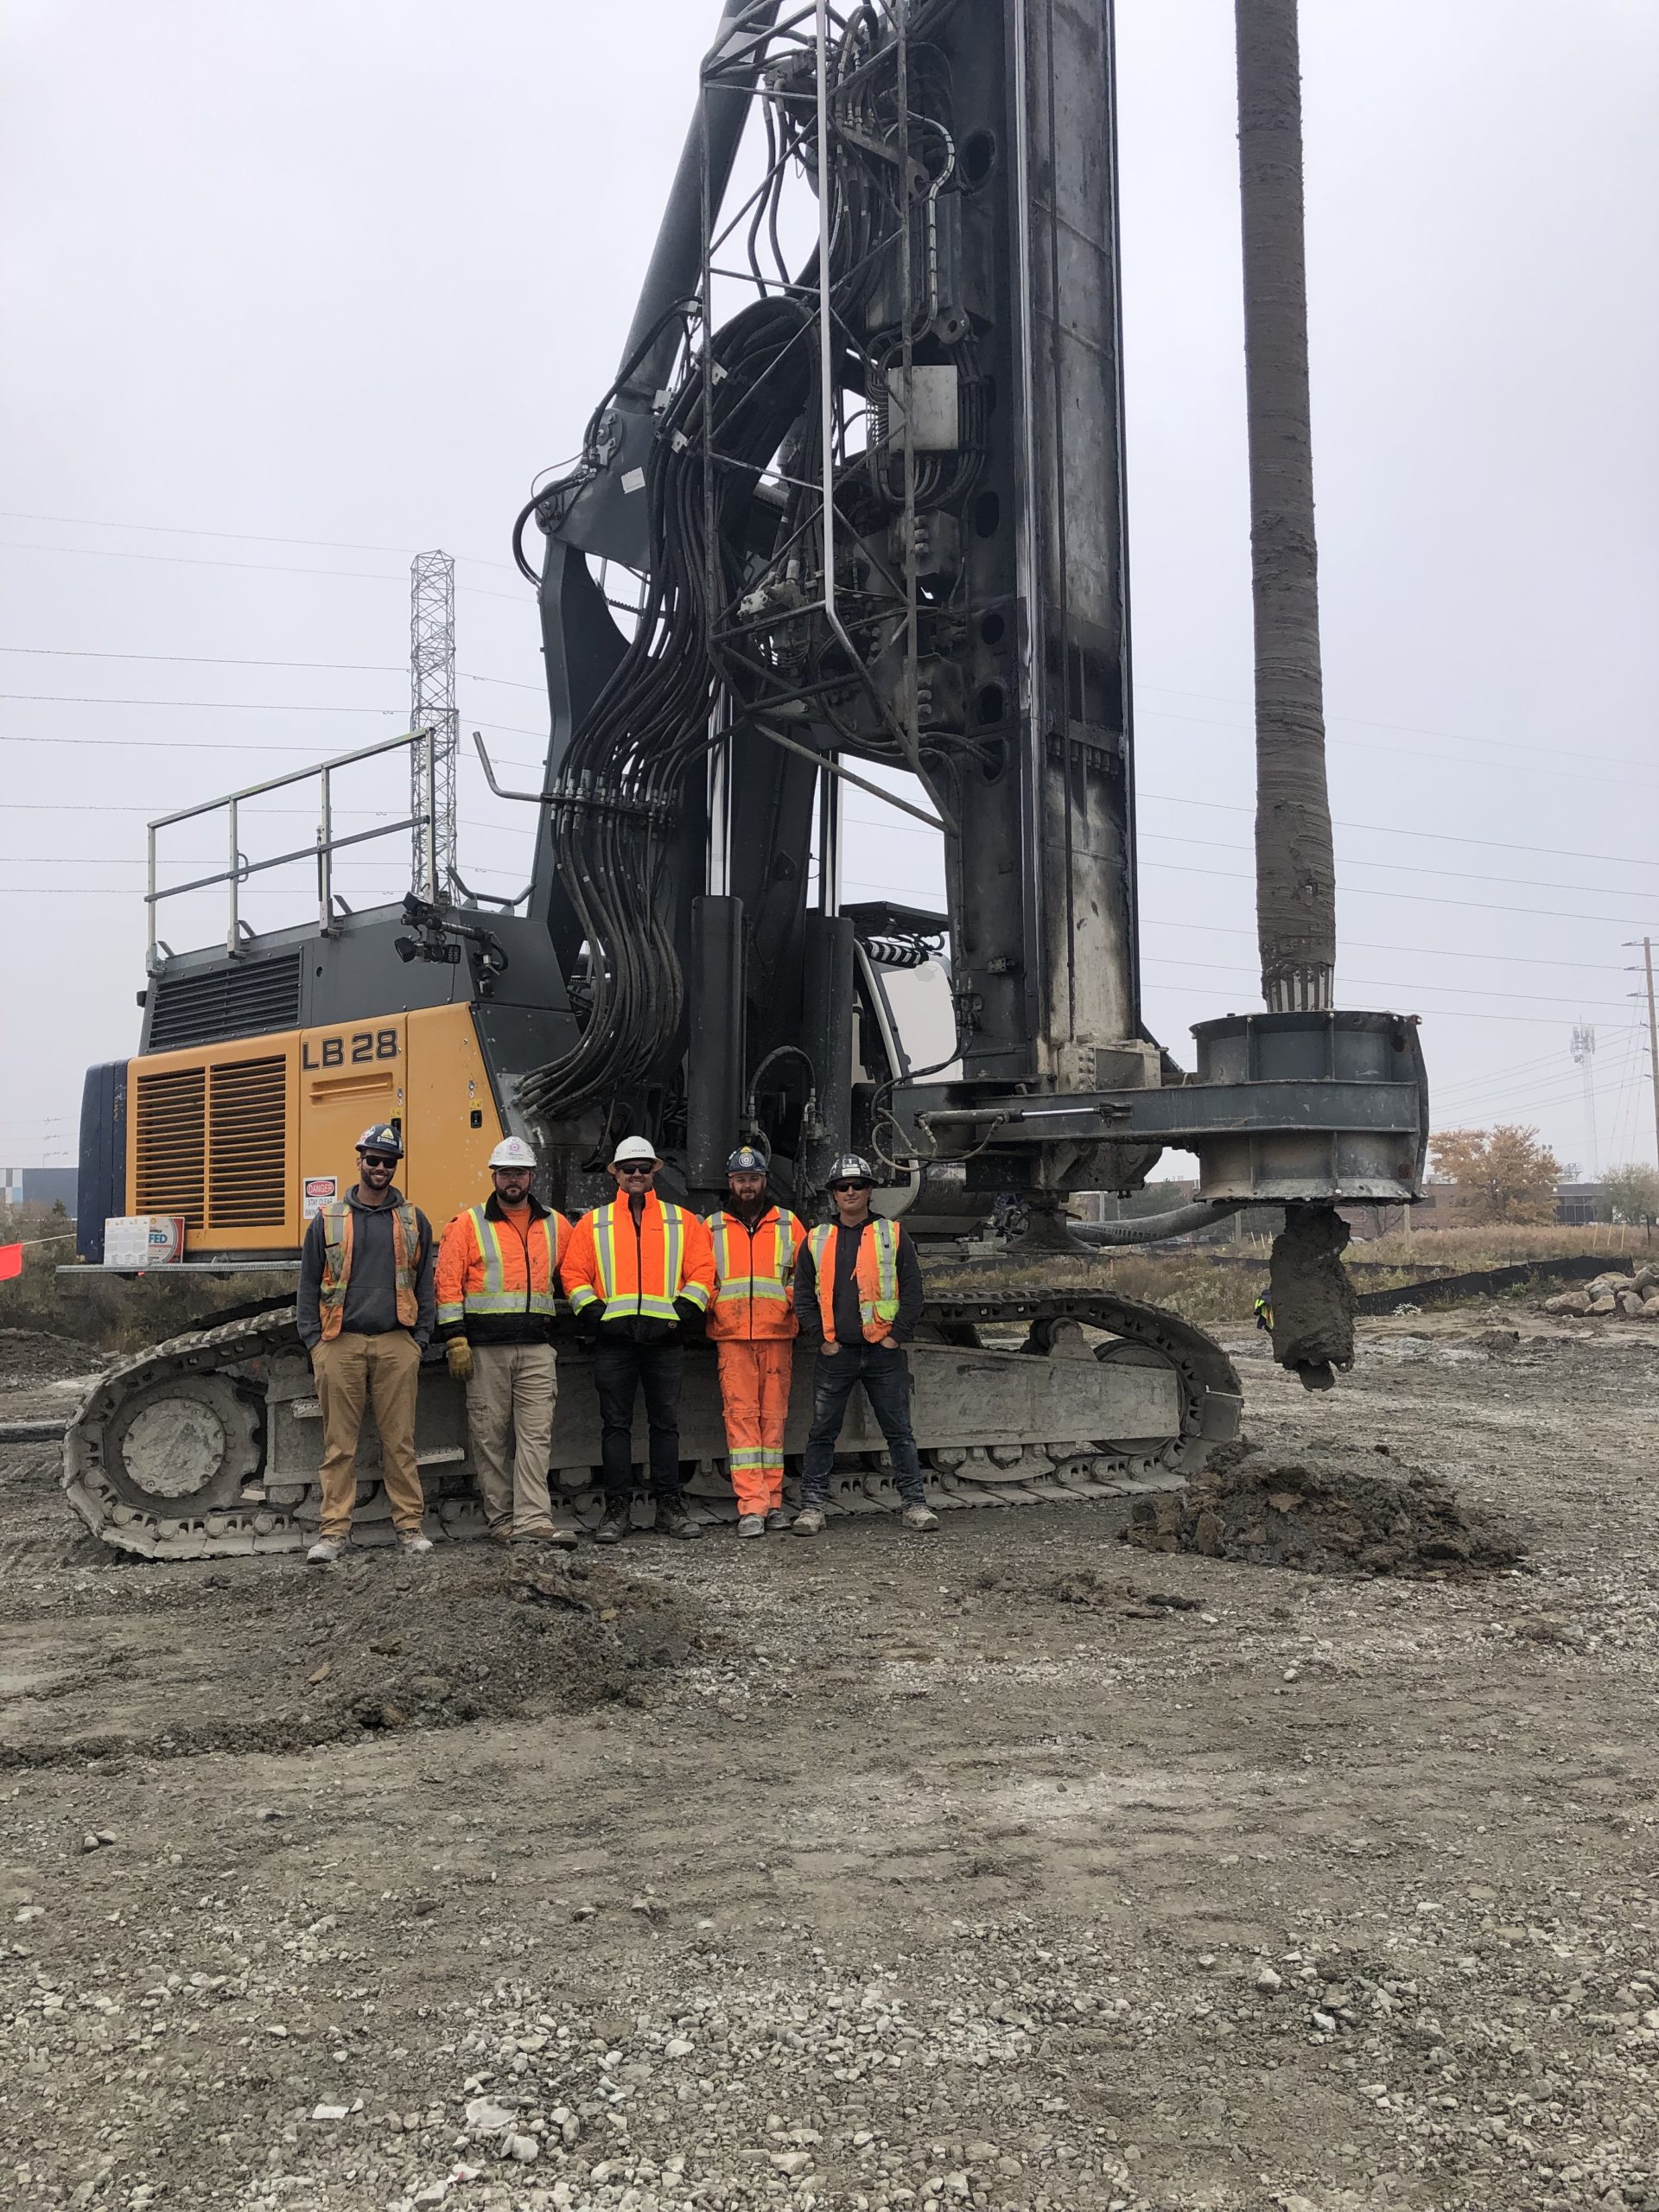 5 members in front of the drill rig